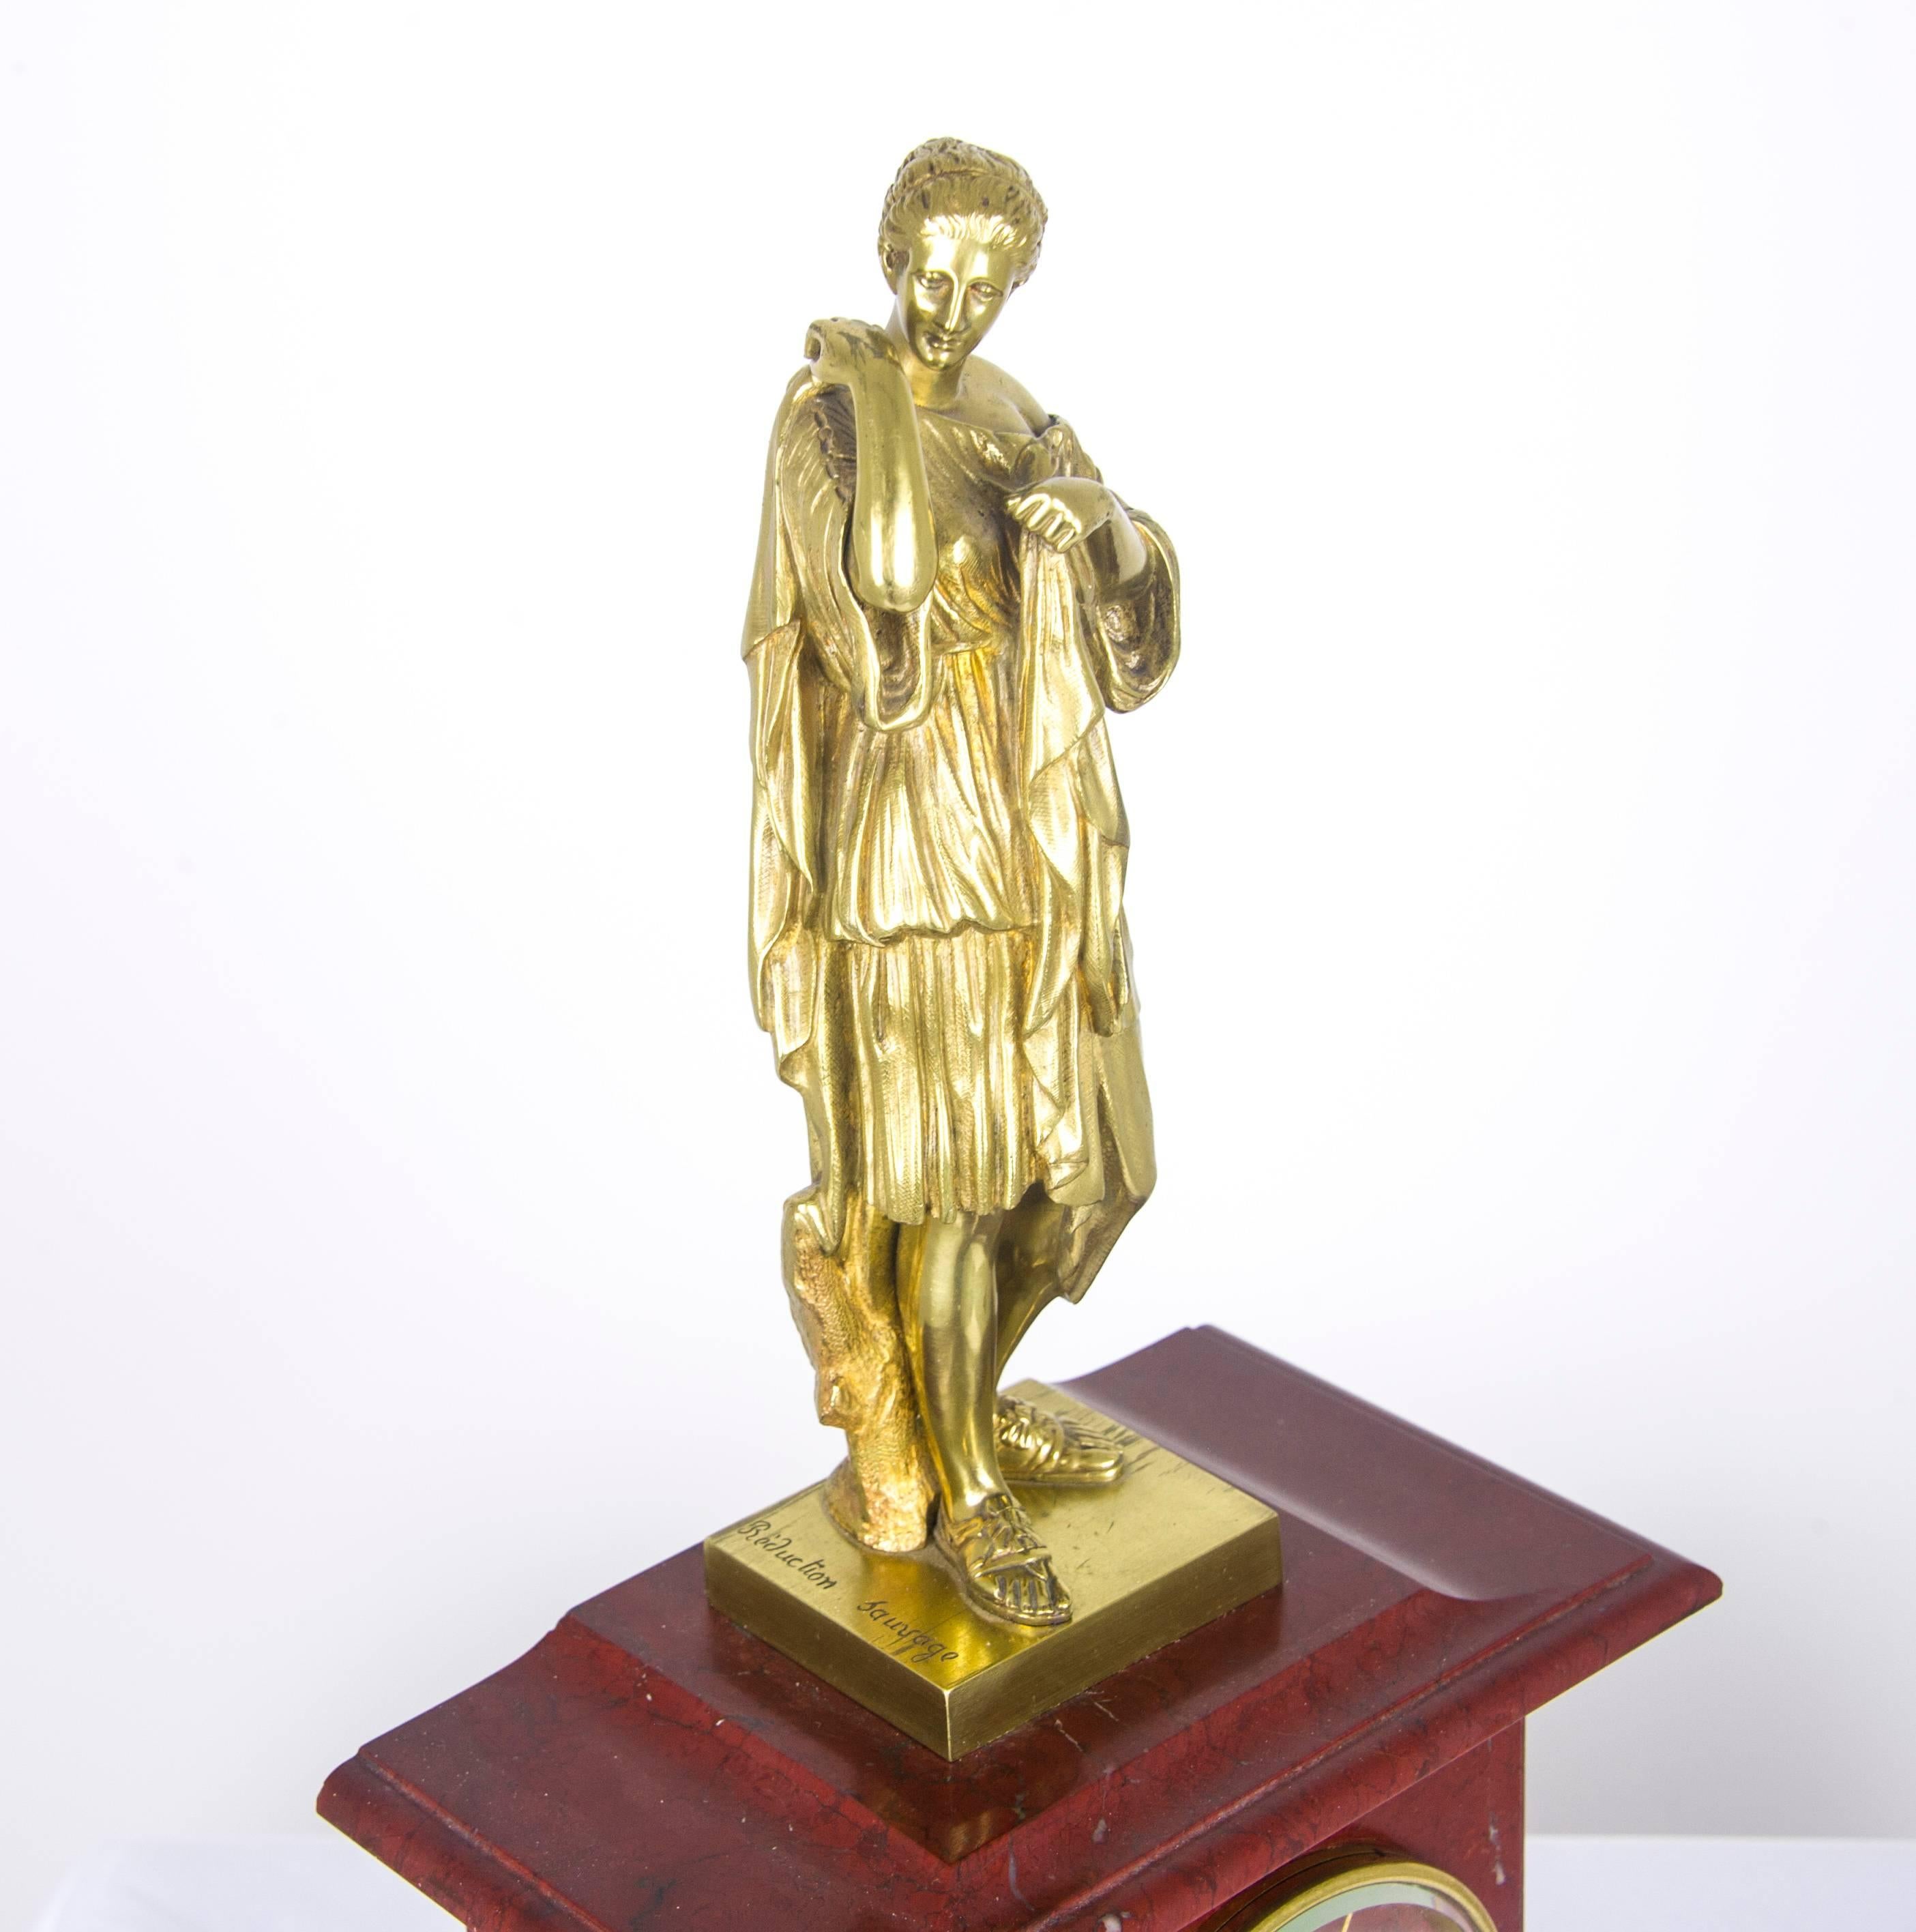 Antique mantel clock, French rouge marble clock, gilt bronze mantel clock, antiques furniture.

France, 19th century.
8 day striking marble French movement strikes on the half and full hour
Fine gilt bronze figure of a Grecian girl on top
Gilt